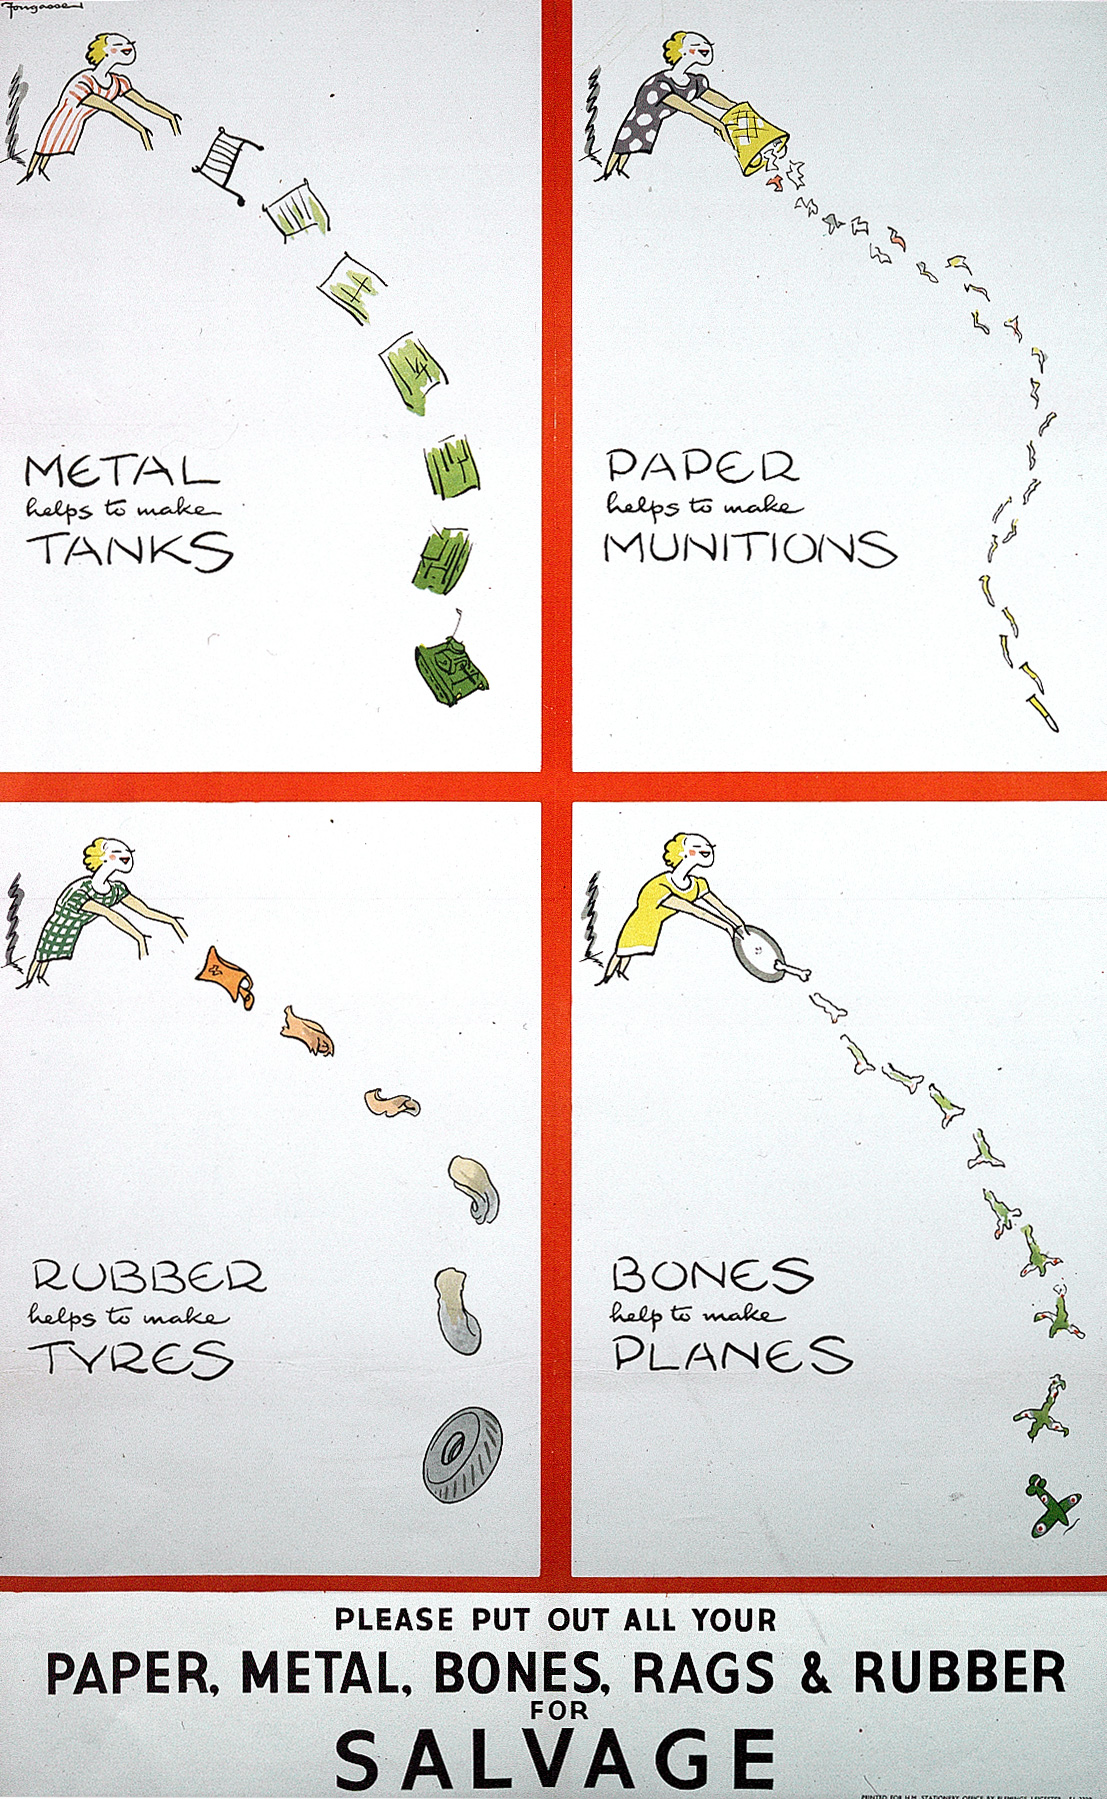 Poster featuring four illustrations of a woman. In the top left she throws a metal frame that turns into a tank, in the top right she throws out waste paper that turns into bullets, in the bottom left she throws out a bag that turns into a tyre, and in the bottom right she throws out bones that turn into a plane.